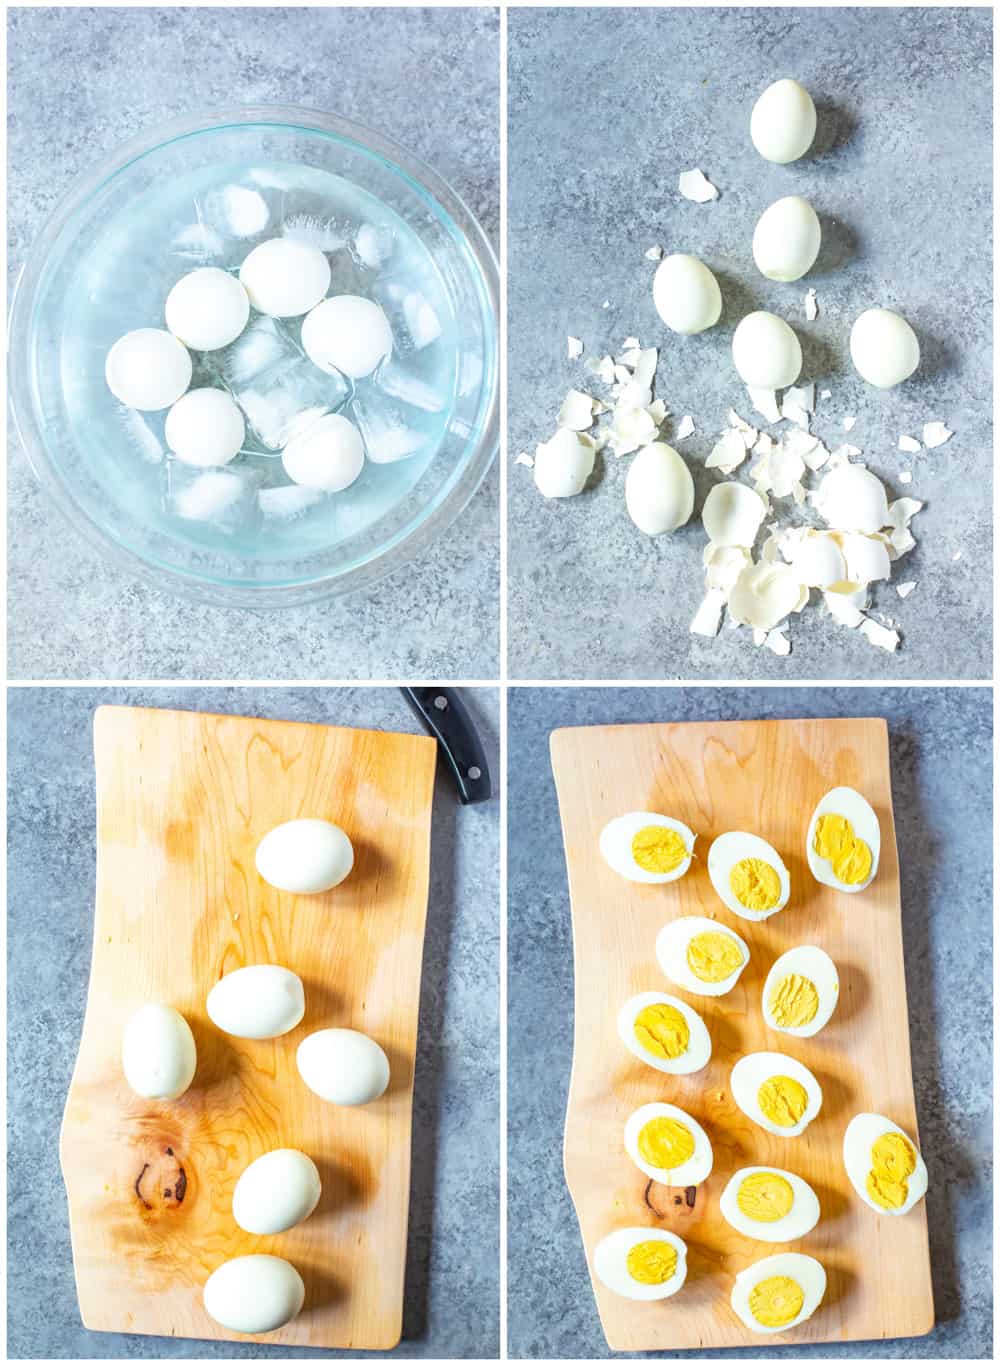 photo collage shows how to easily peel hard boiled eggs